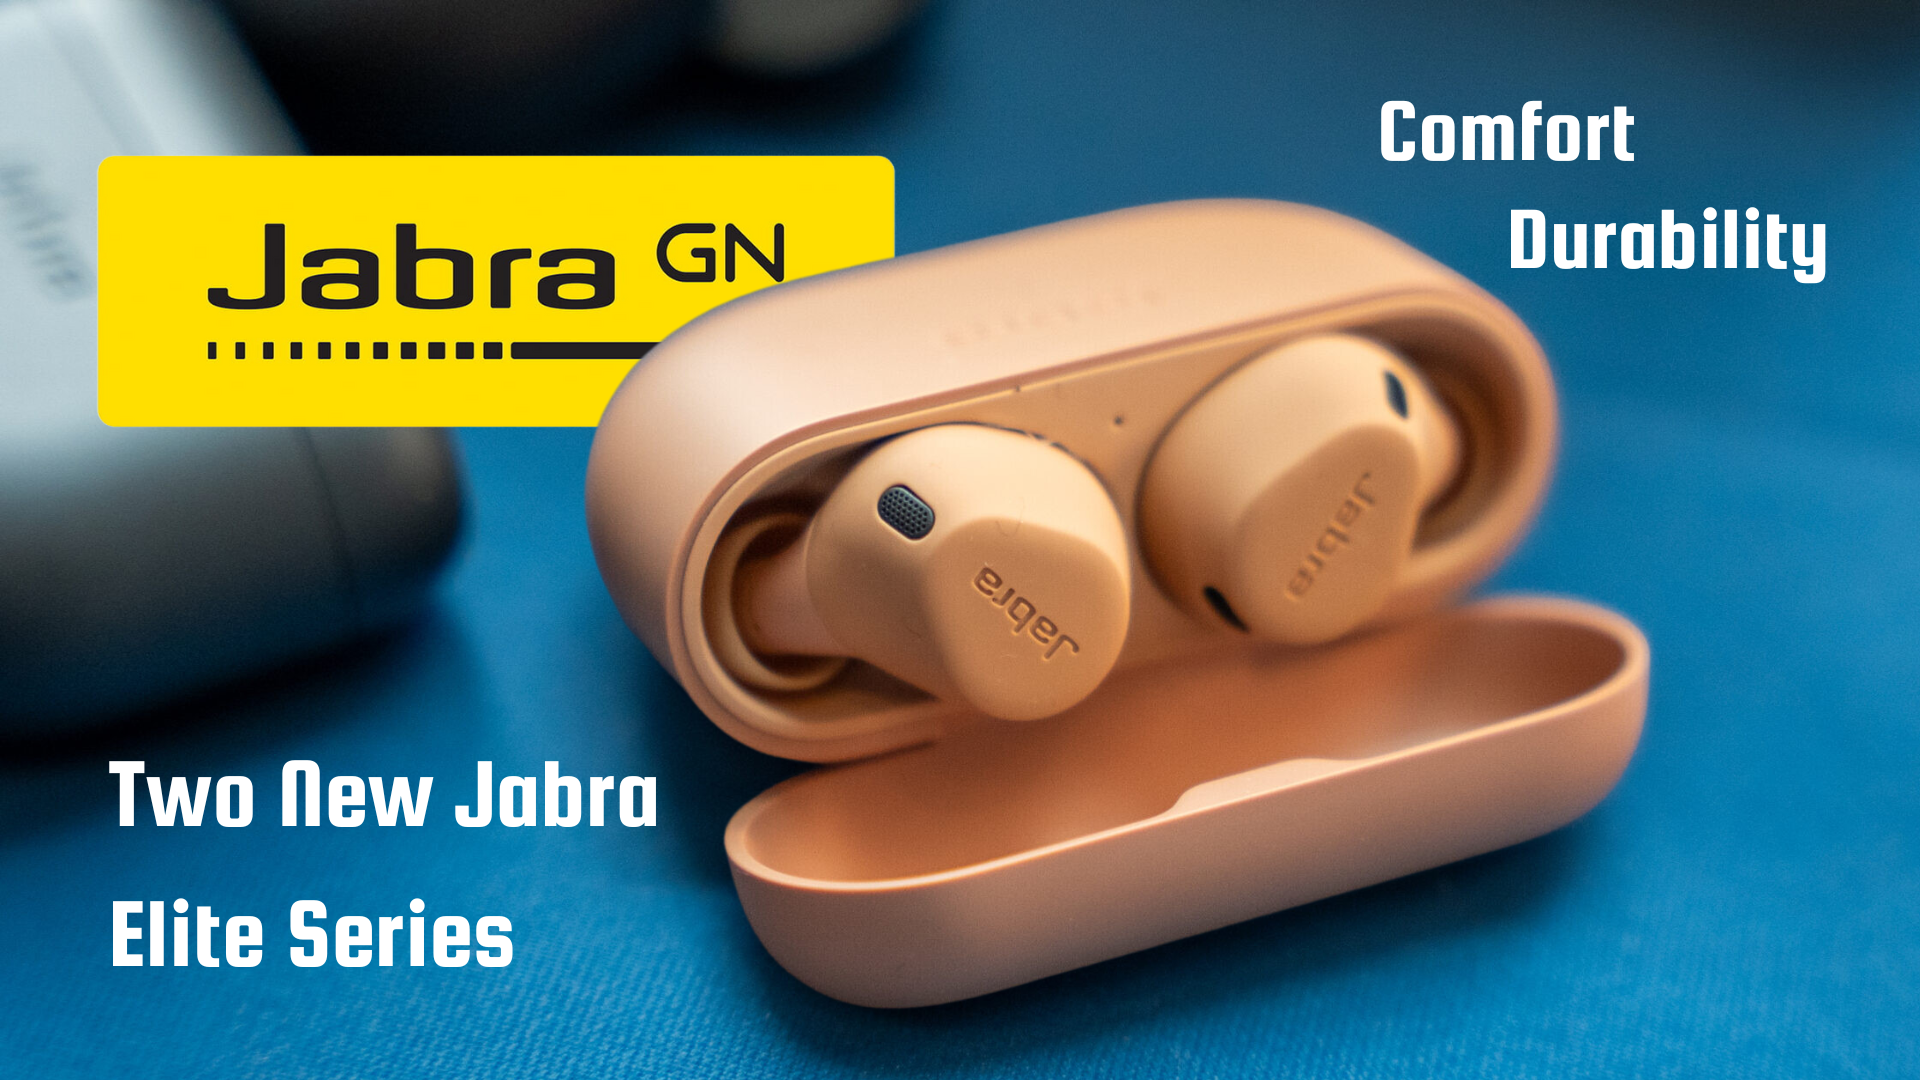 Jabra brings comfort and durability with two new Elite series earbuds